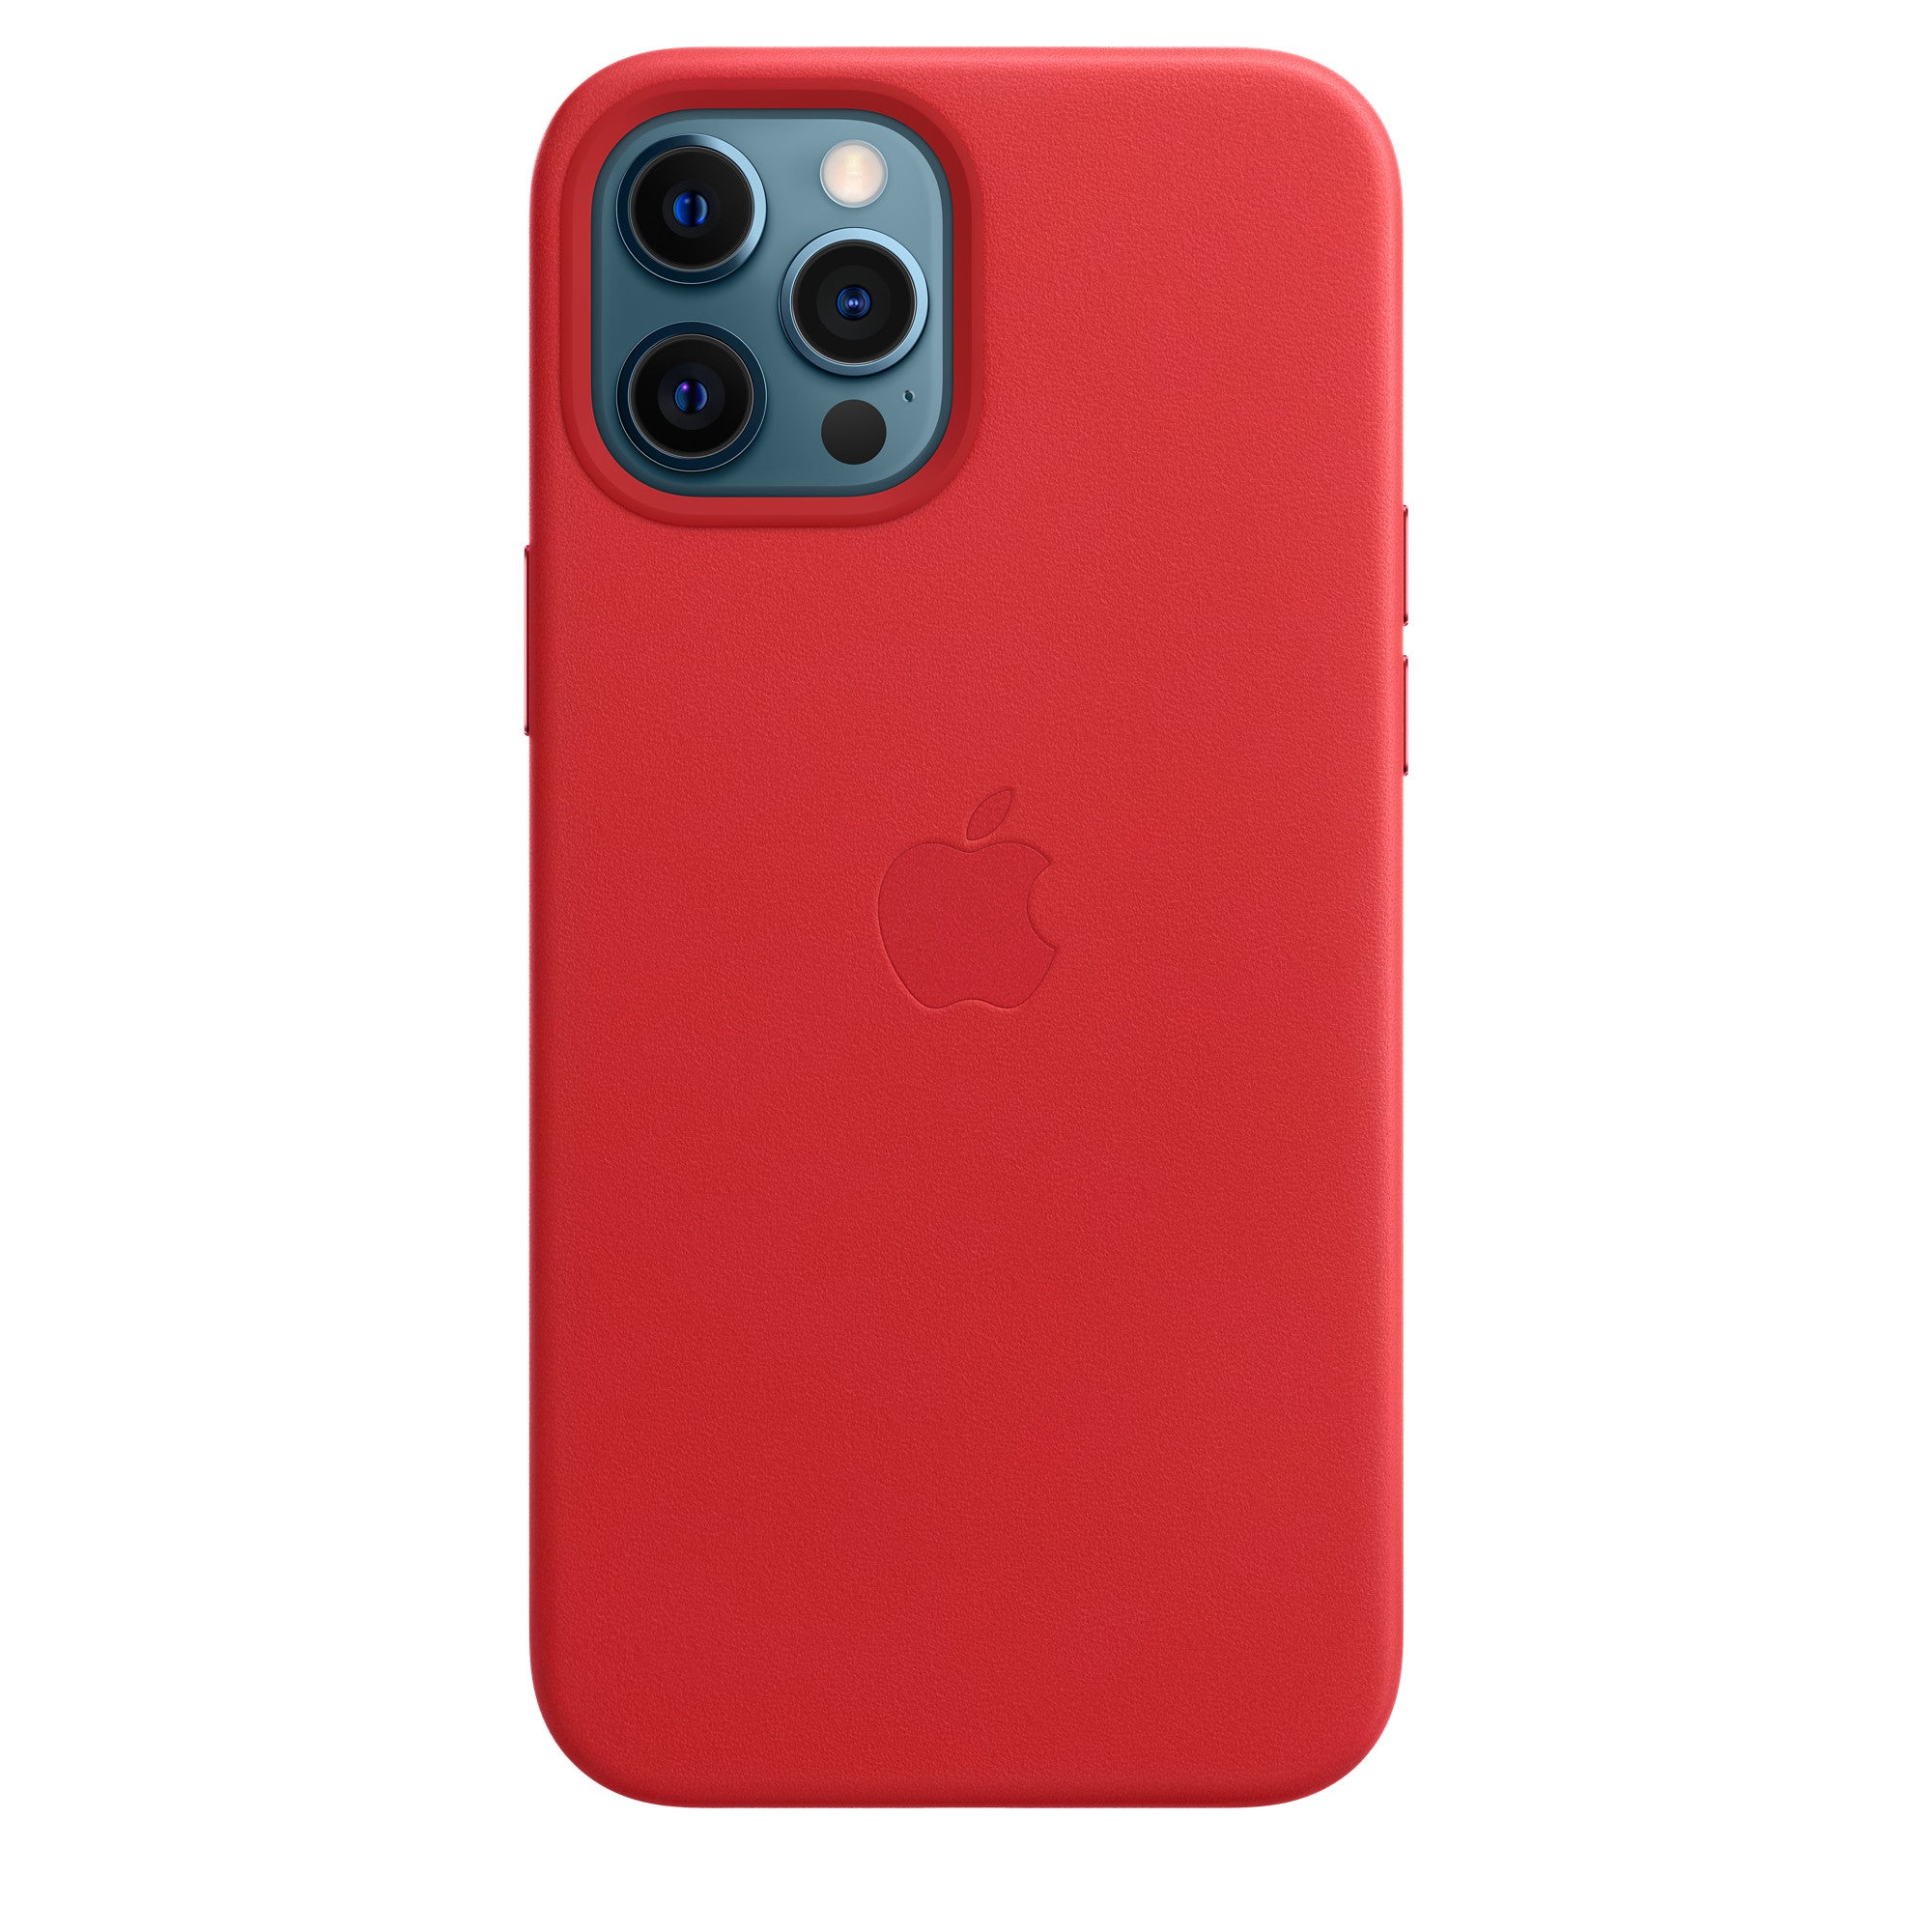 Apple iPhone 12 Pro Max Leather Case Deep Scarlet Scarlet New - Sealed